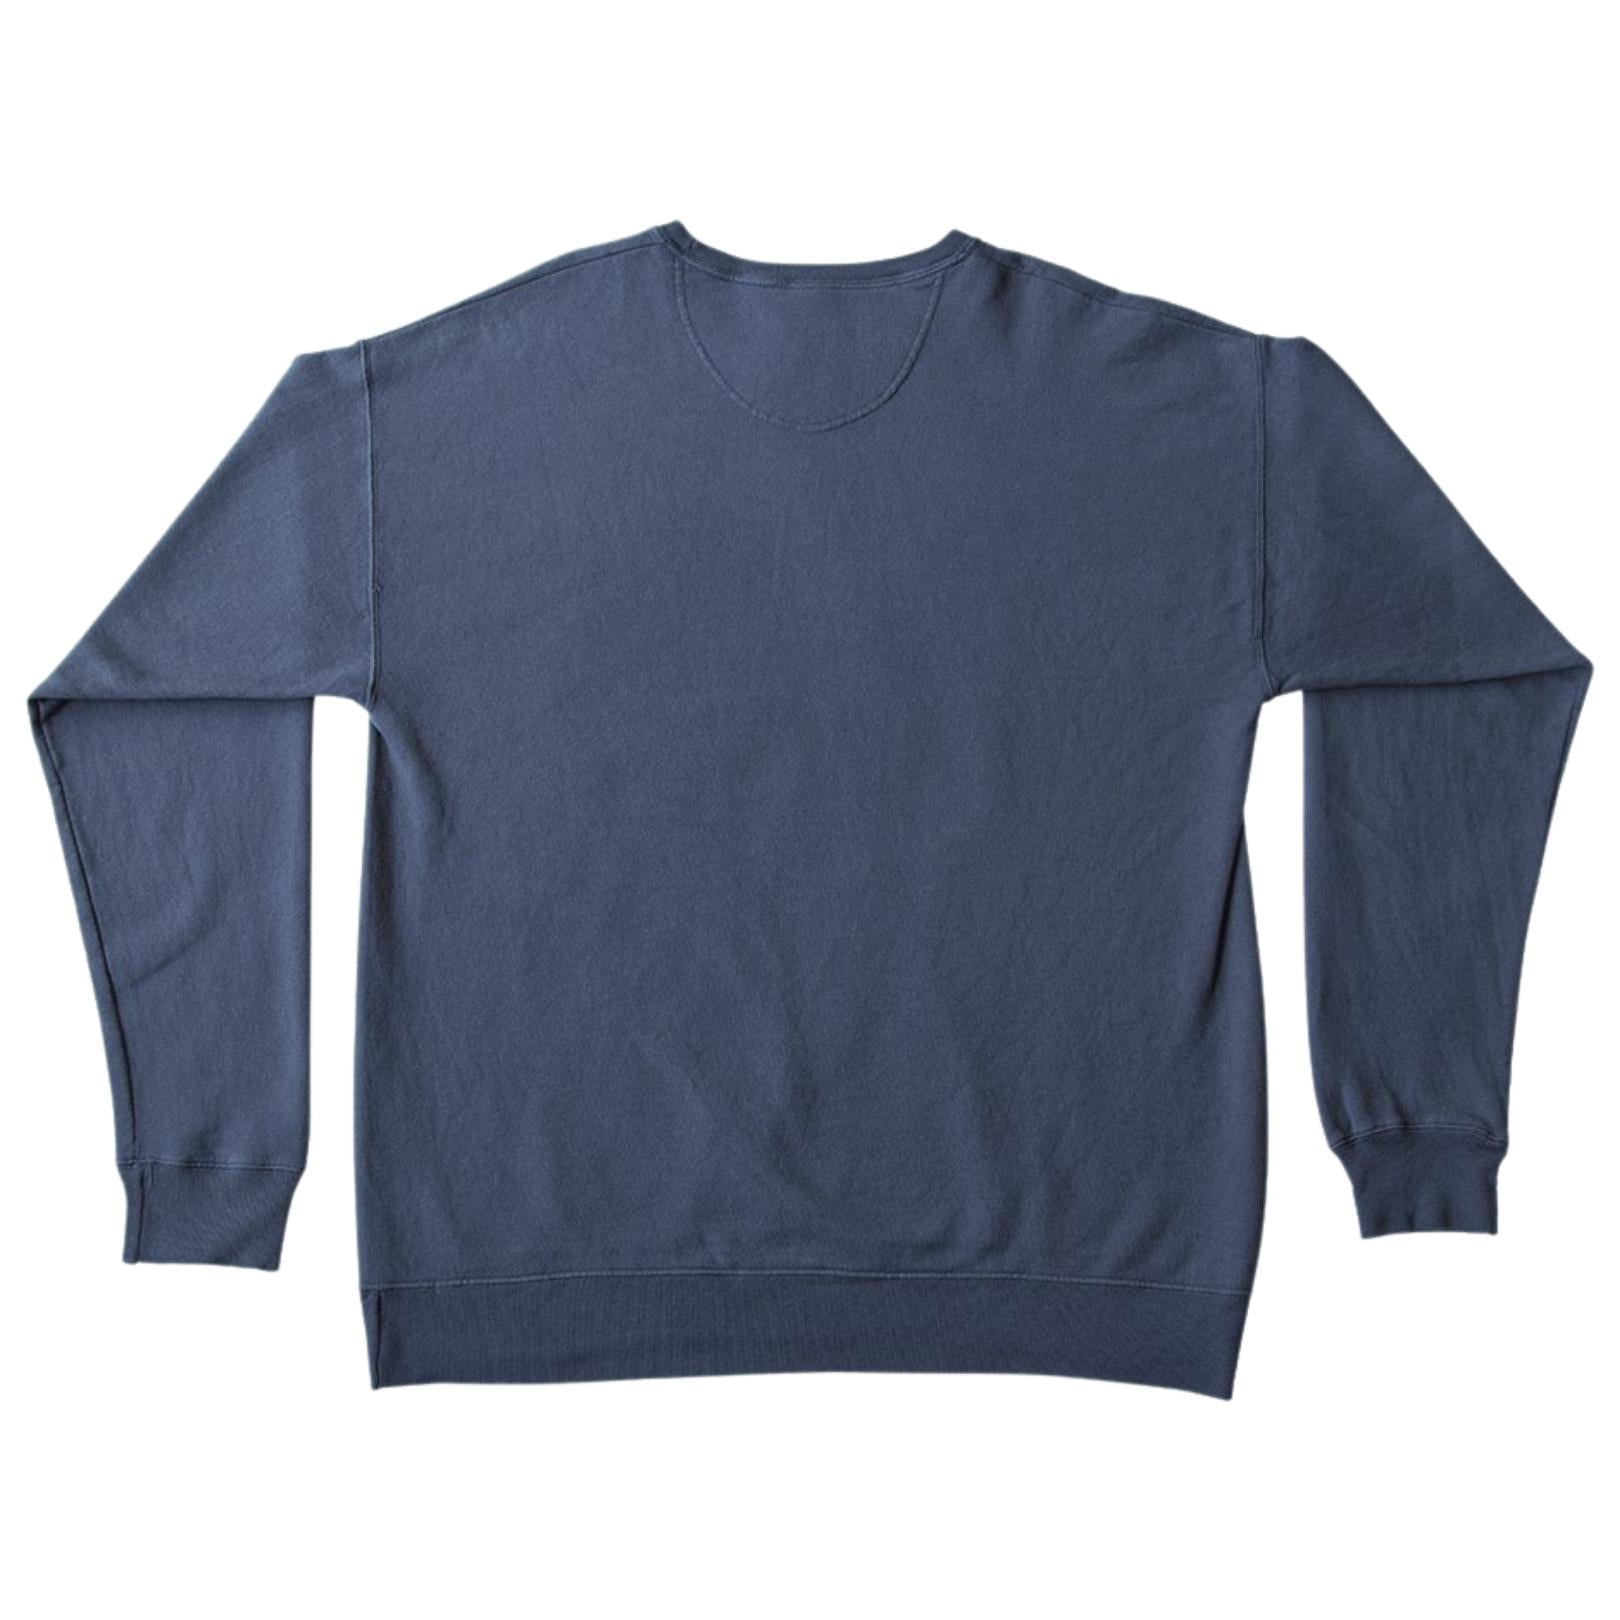 Nature Backs Limited Edition Crewneck | Limited Spark Navy Crewneck made Nature-Inspired Design on Ultra-Soft Fabric